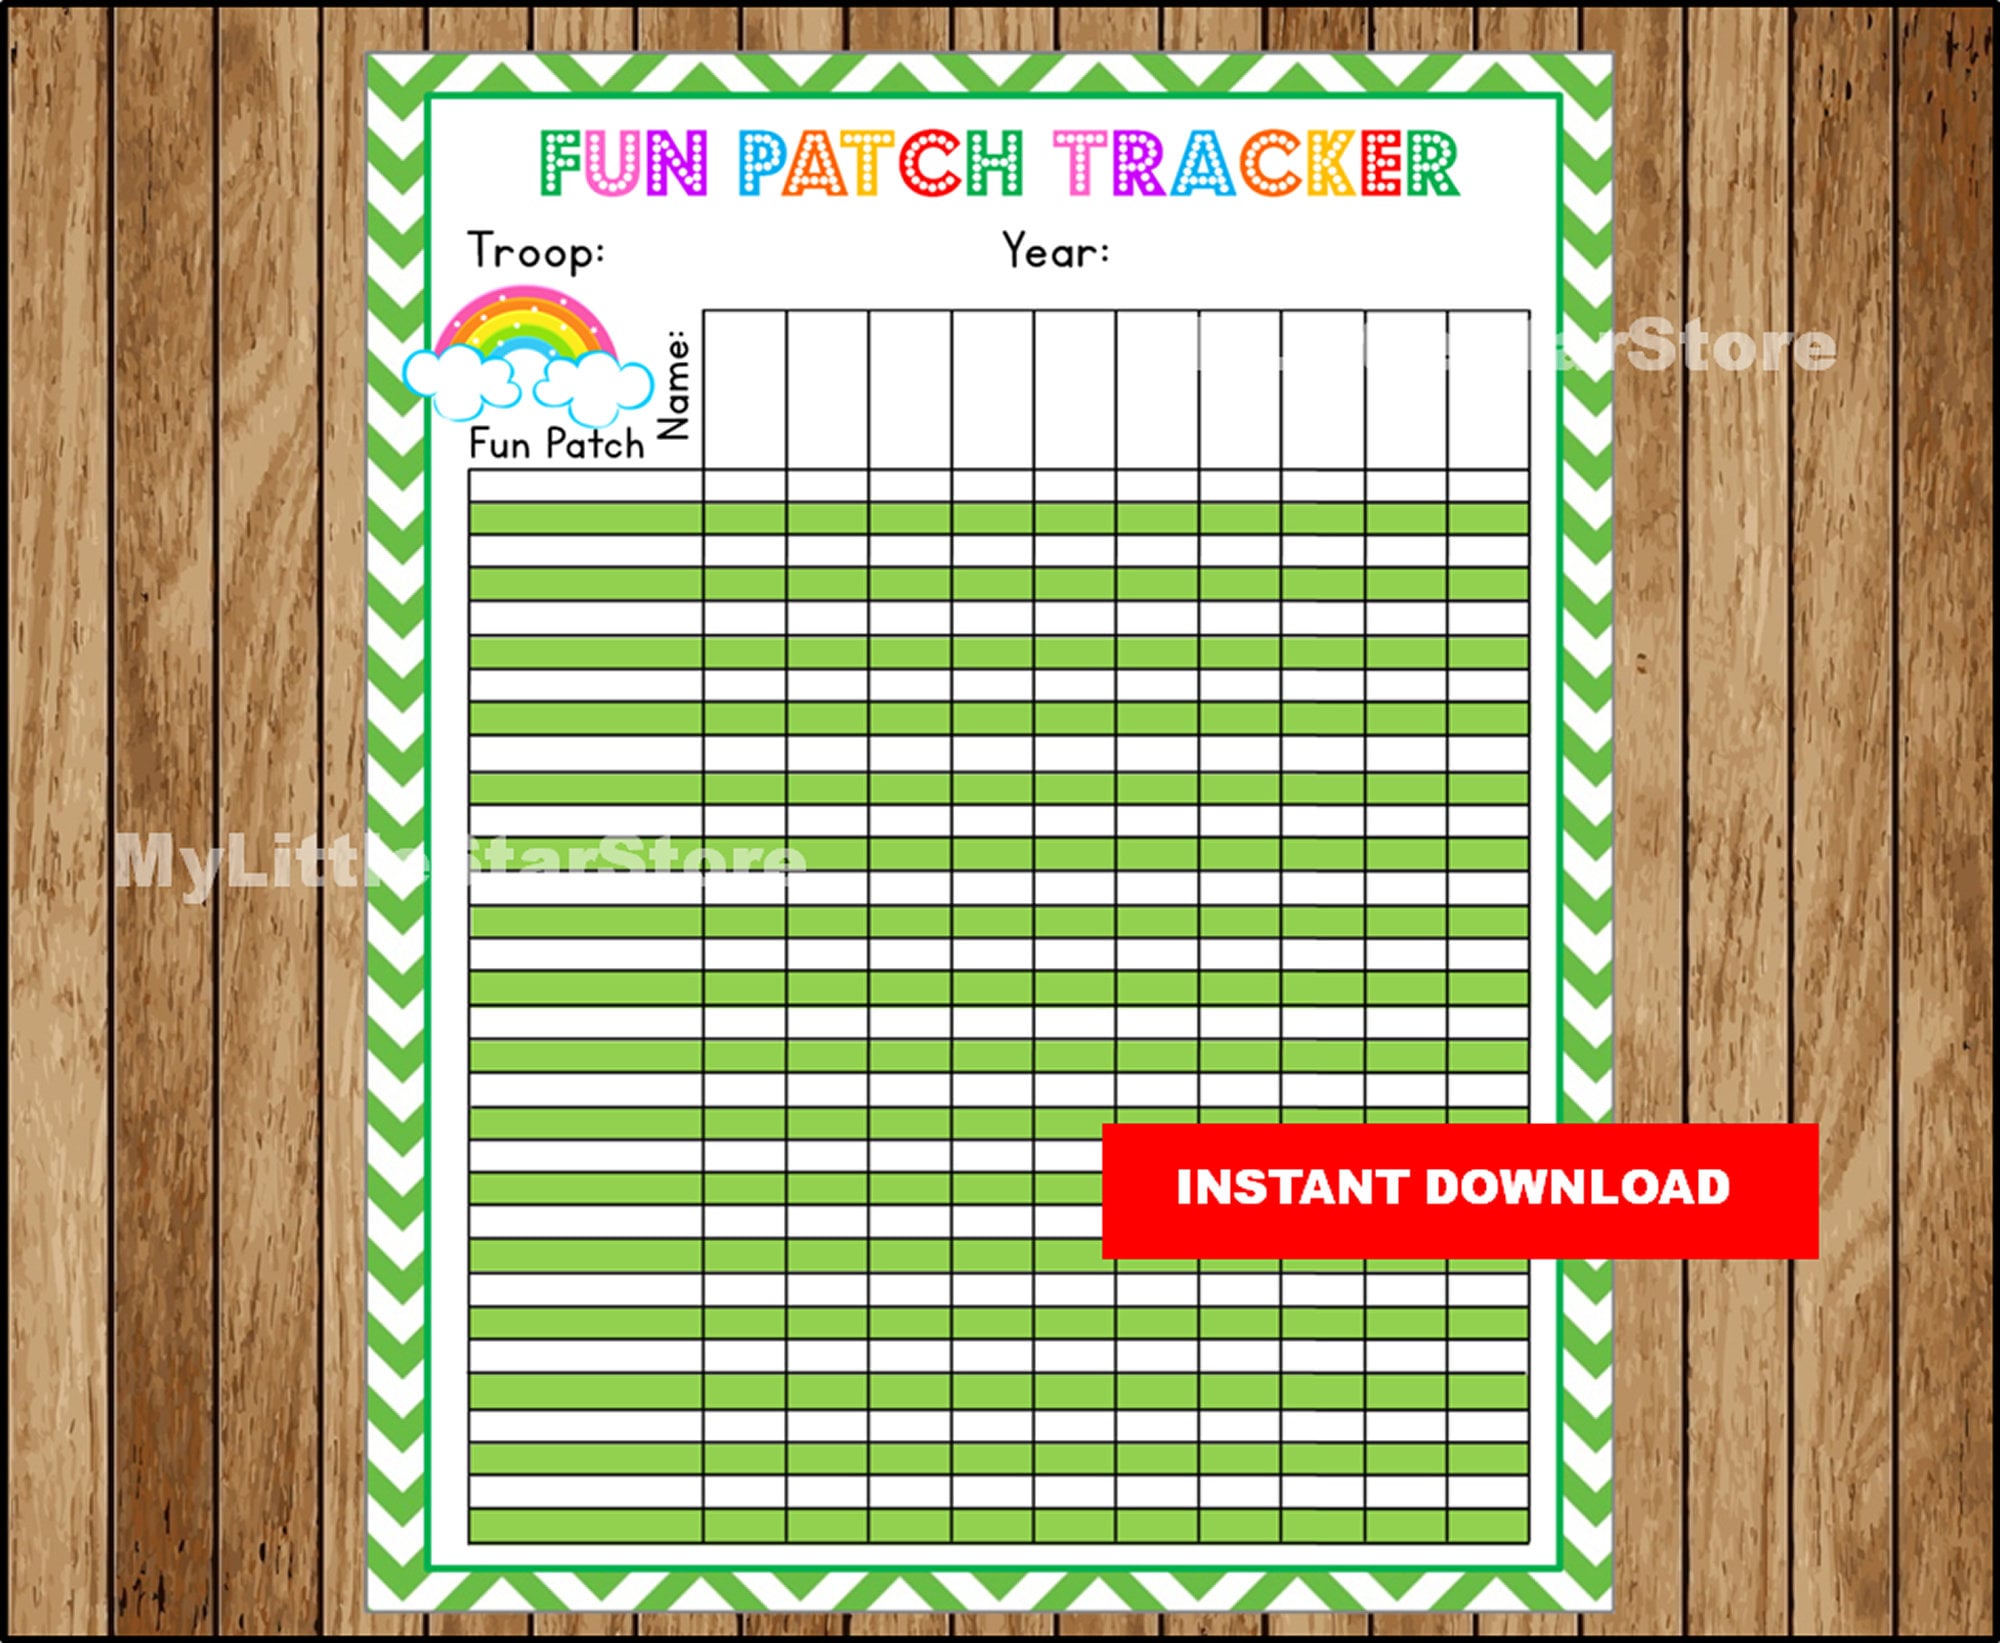 Girl Scouts Fun Patch Tracker Printable Fun Patch Tracker Instant download